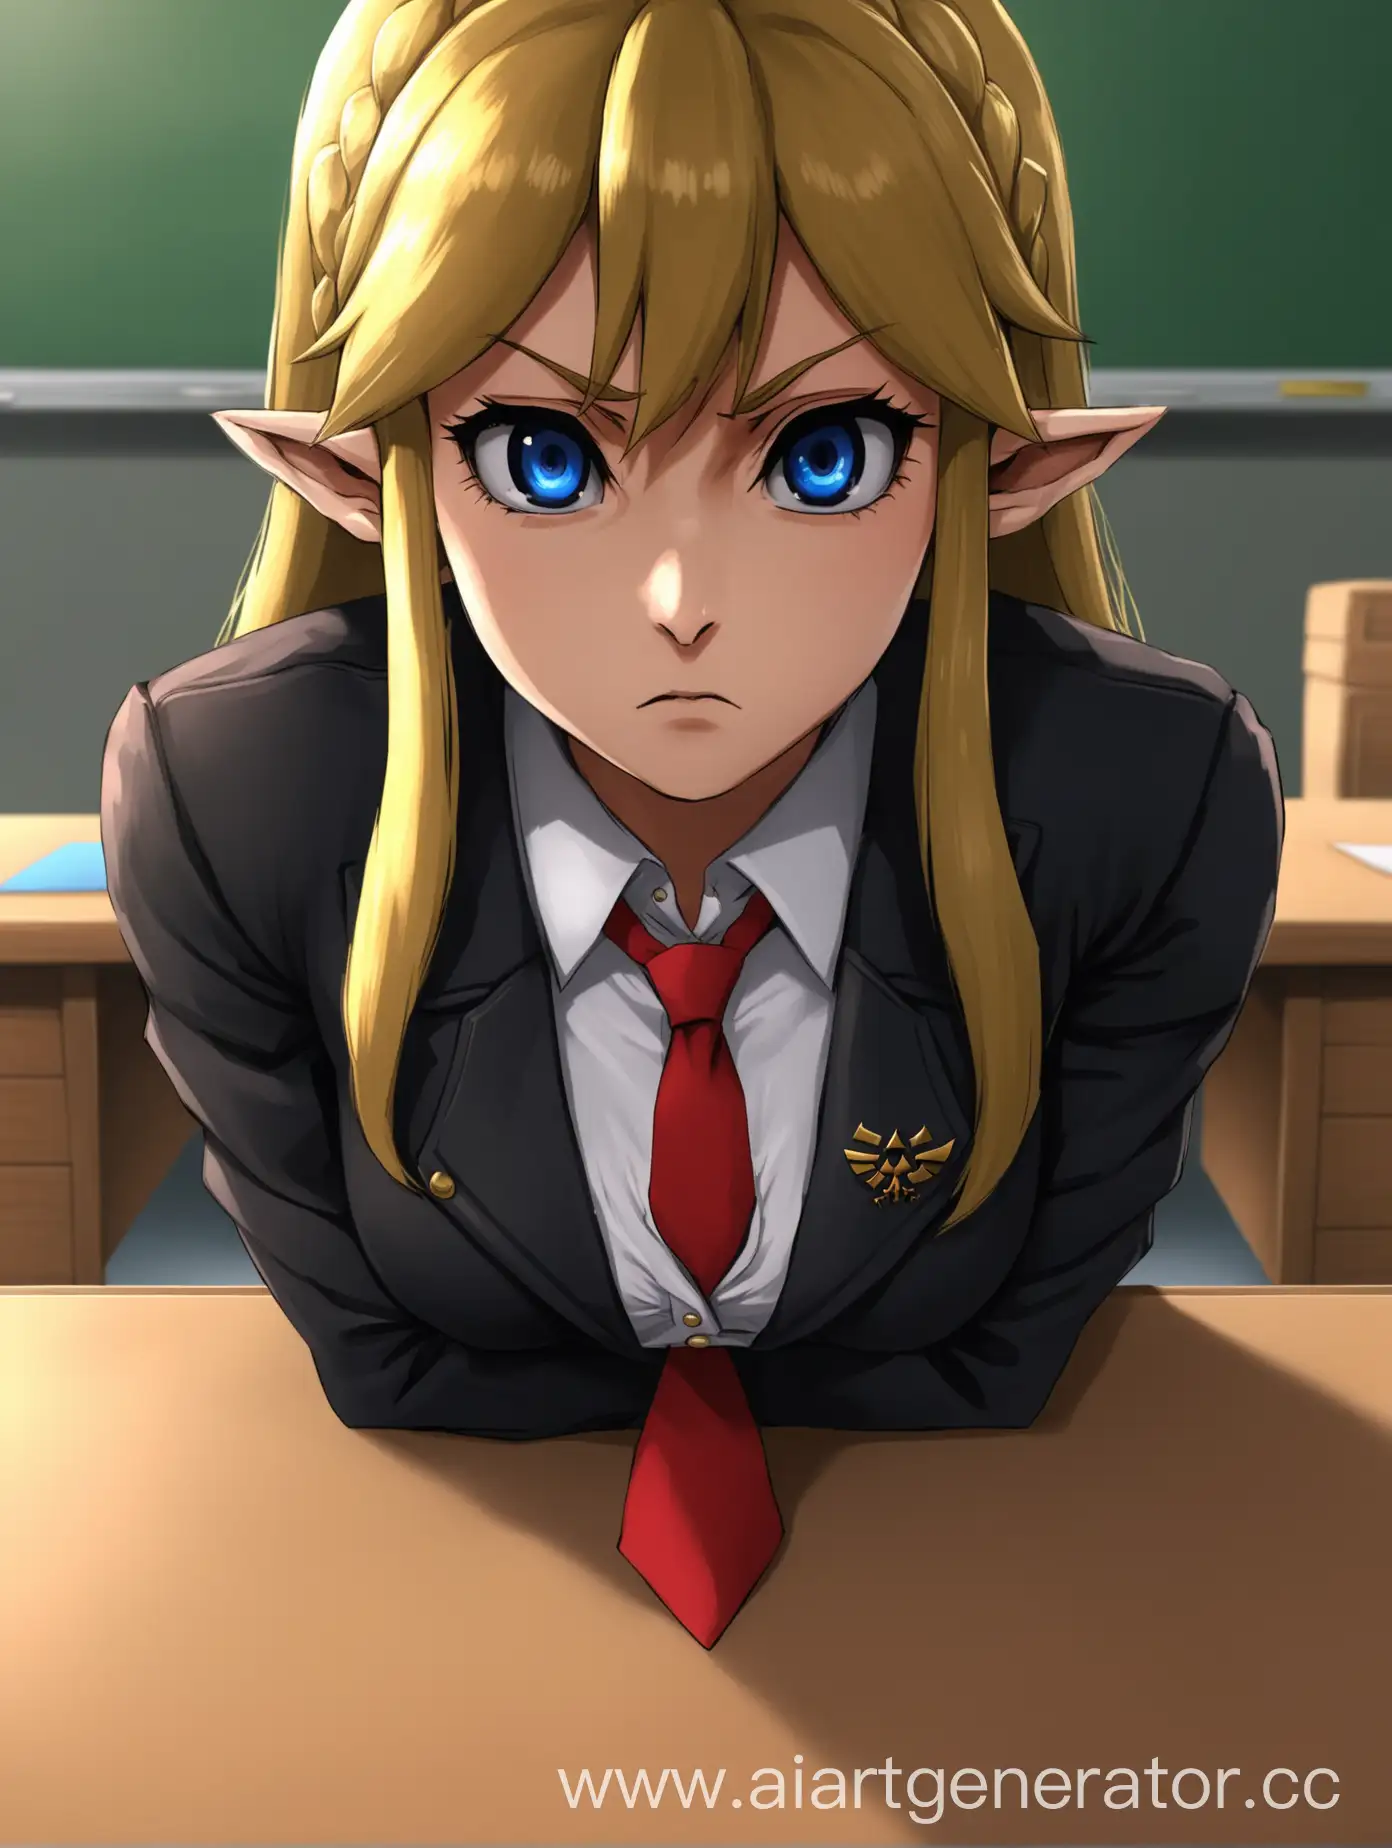 Pov, Zelda teacher , short tie, white blouse under black fitted buttoned jacket, sitting alone at a desk, mad look,face sitting in forward facing position, close up